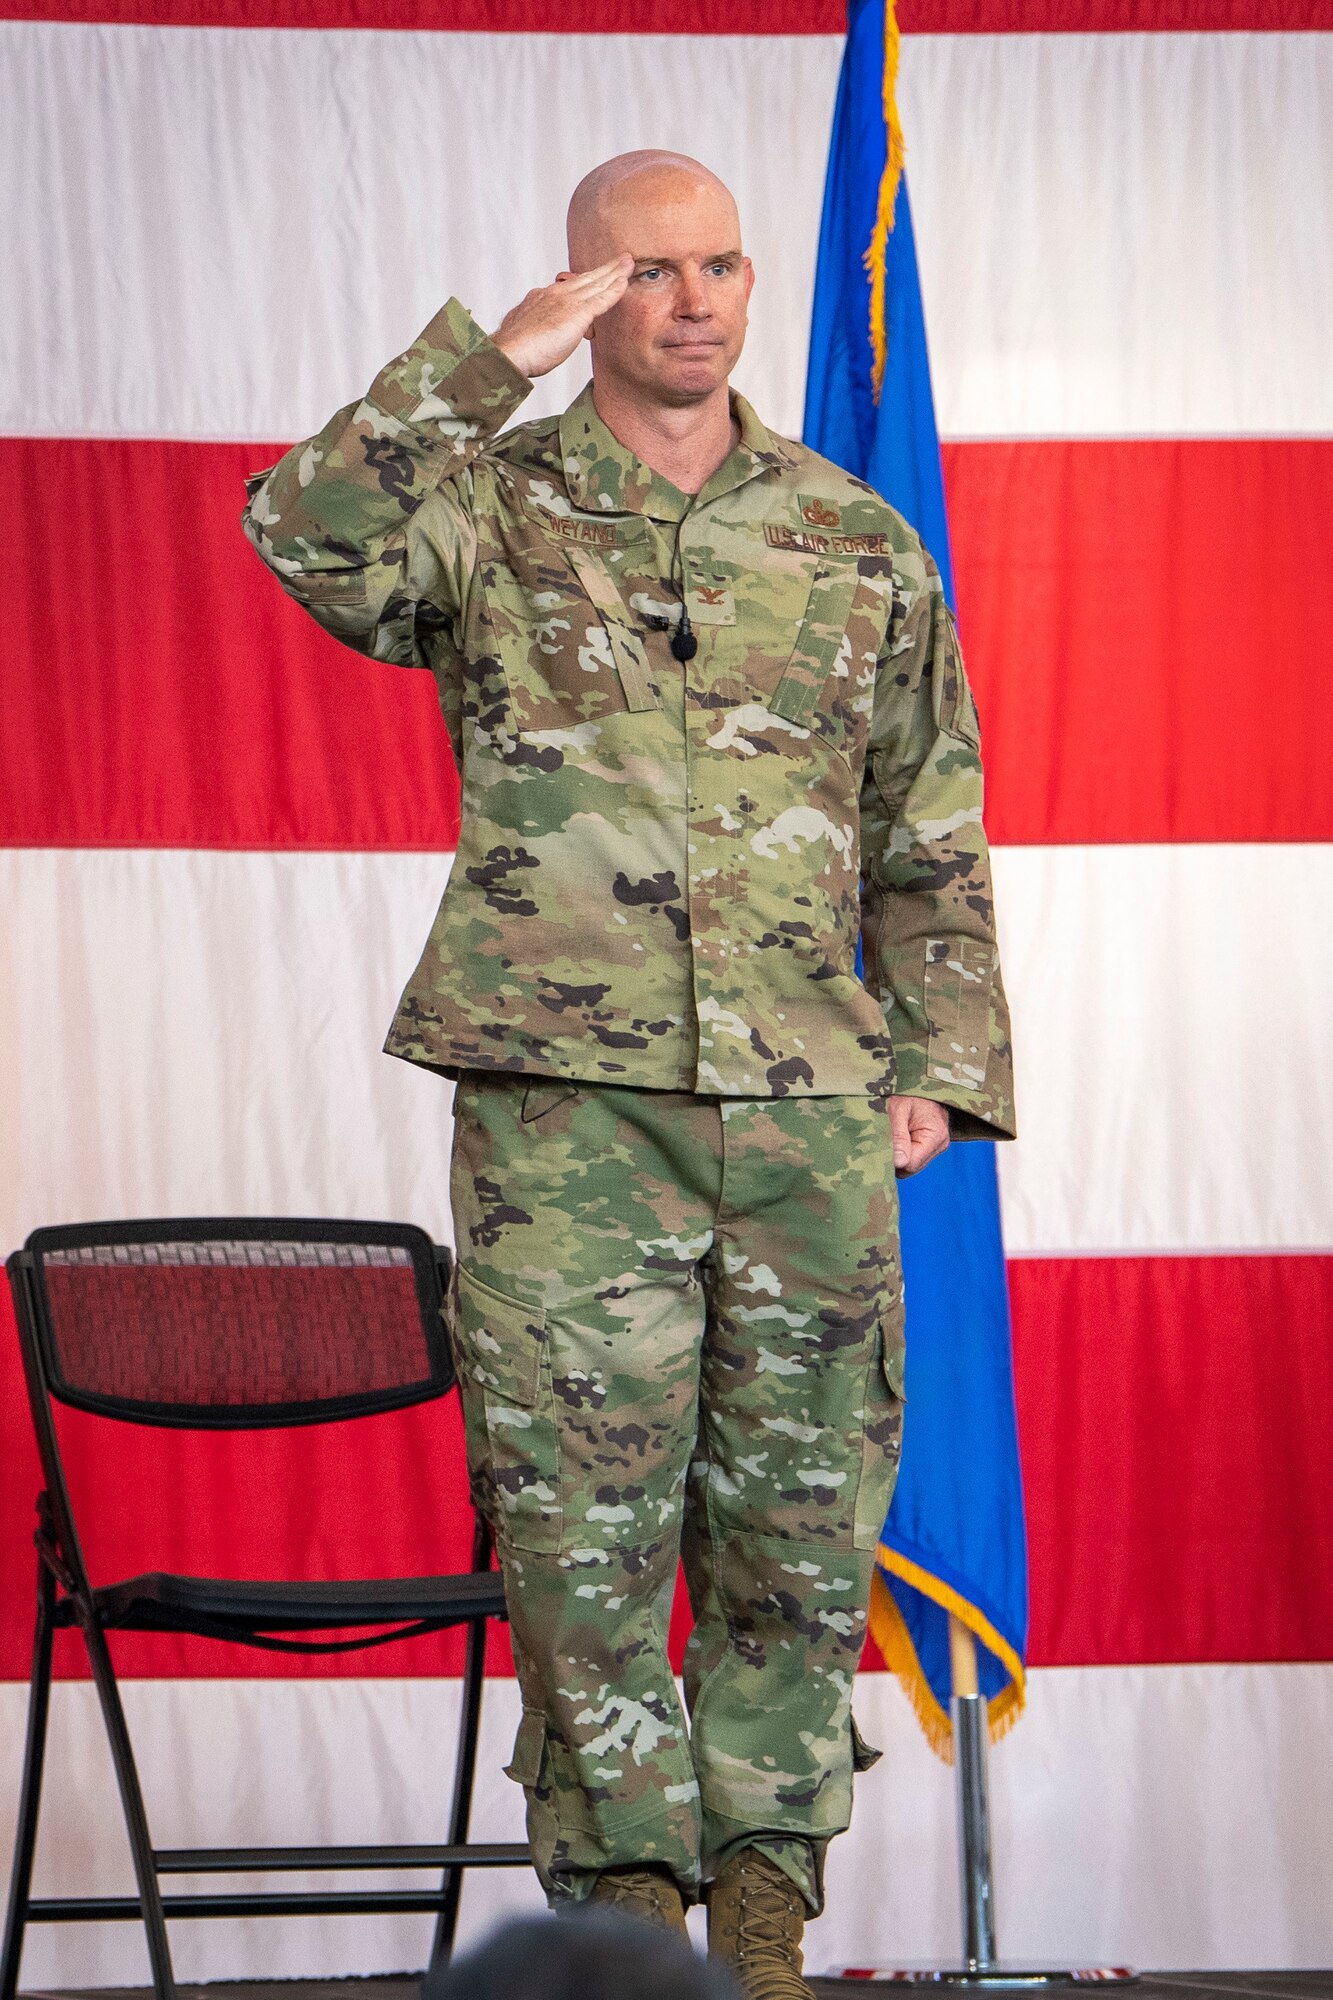 Col. Weyand receives first salute